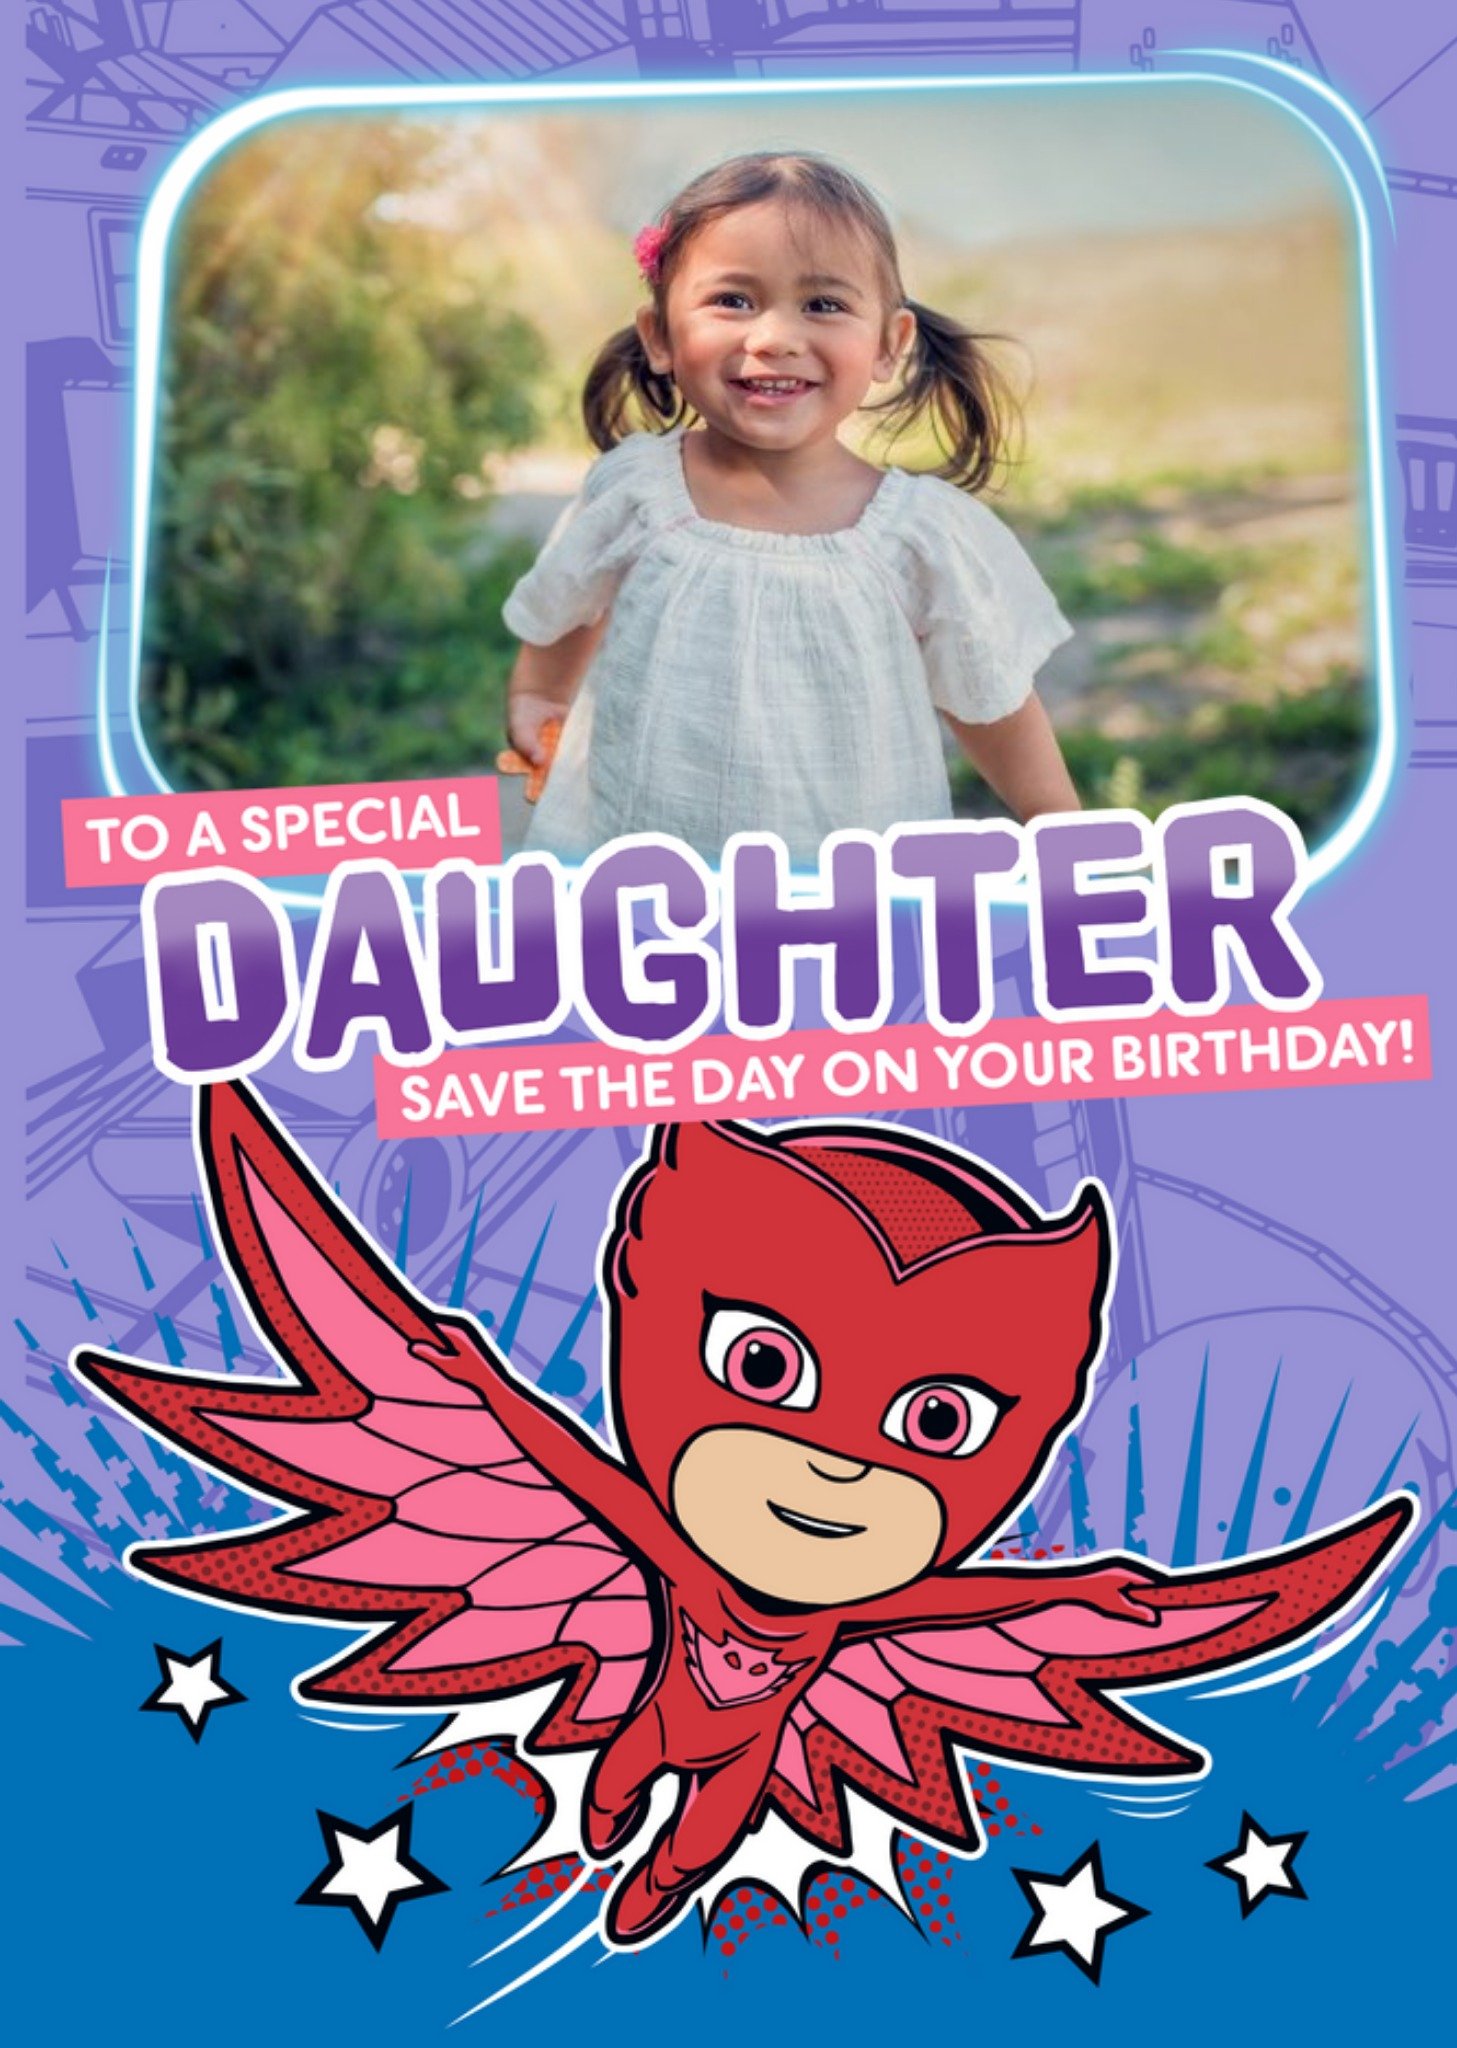 Pj Masks Owlette Photo Upload To A Special Daughter Birthday Card, Large